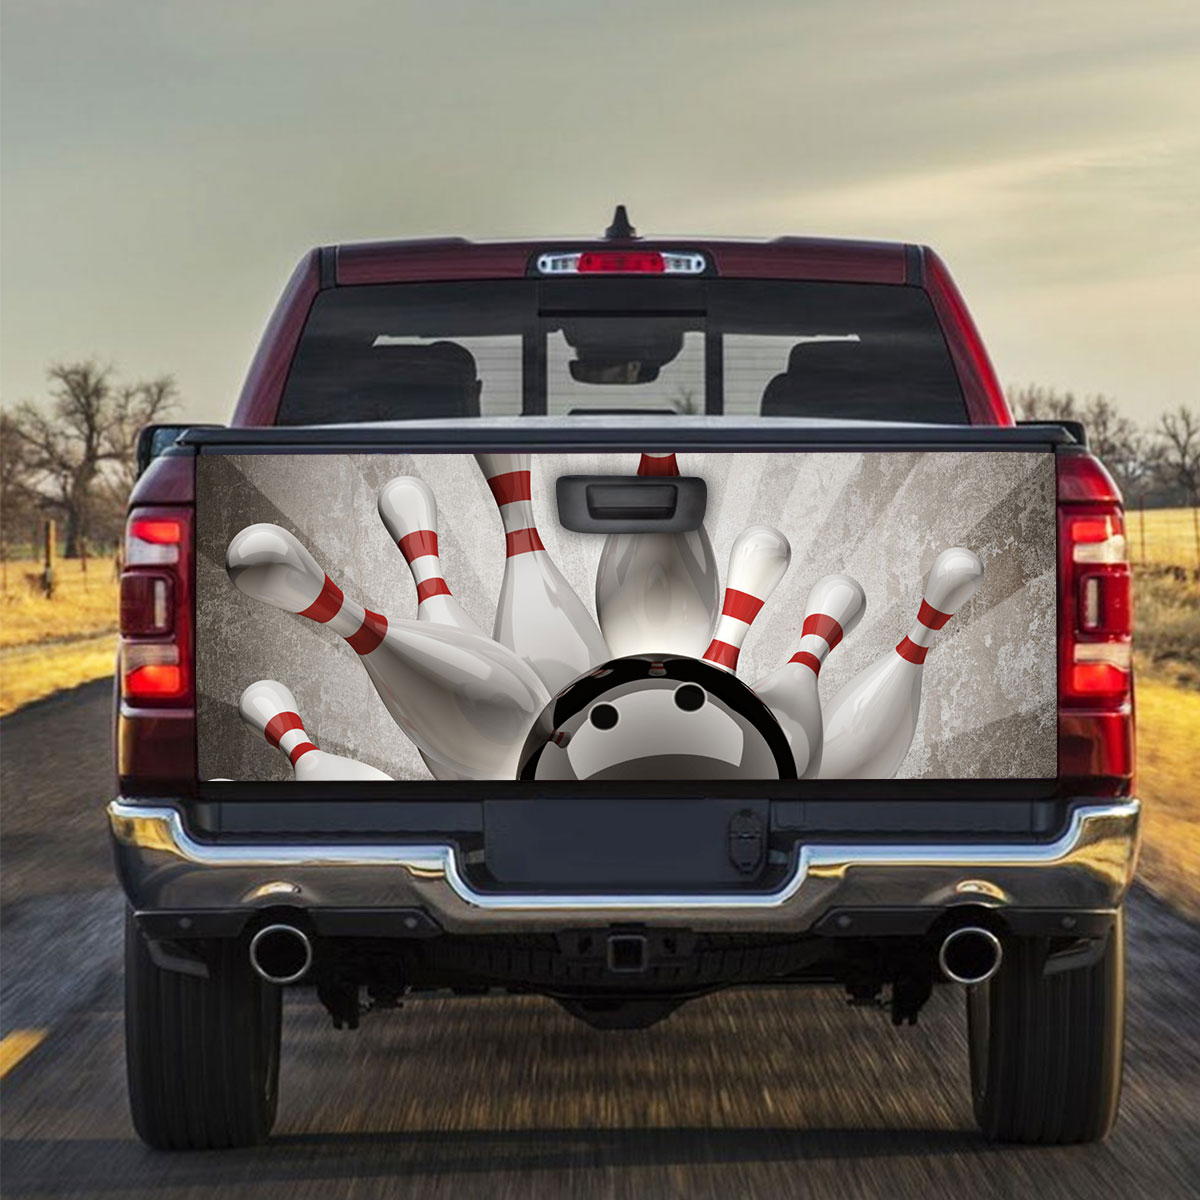 Vintage Bowling Truck Bed Decal